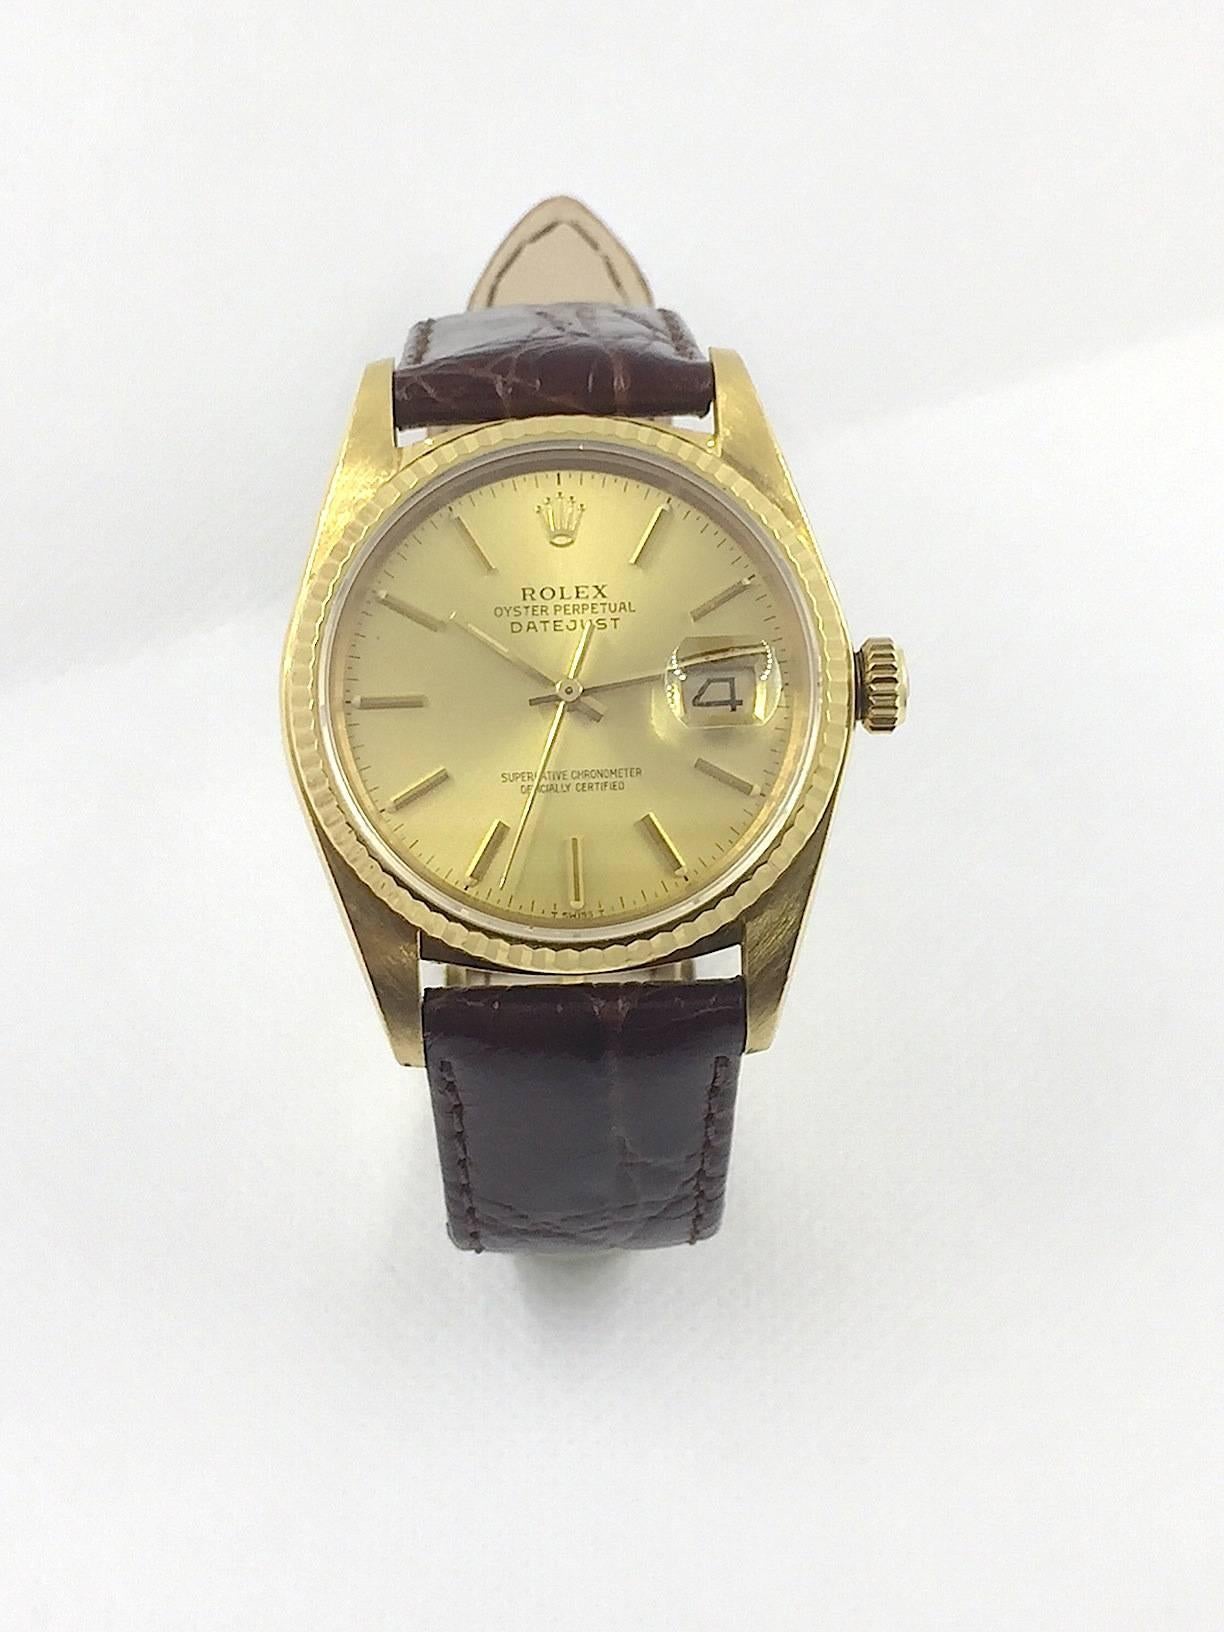 Rolex 18K Yellow Gold Oyster Perpetual Datejust Wristwatch
Factory Champagne Dial with Applied Stick Numeral Markers
18K Yellow Gold Fluted Bezel
36mm in size 
Rolex Calibre Base 3035 Automatic Quick-Set Movement
Sapphire Crystal
1980's